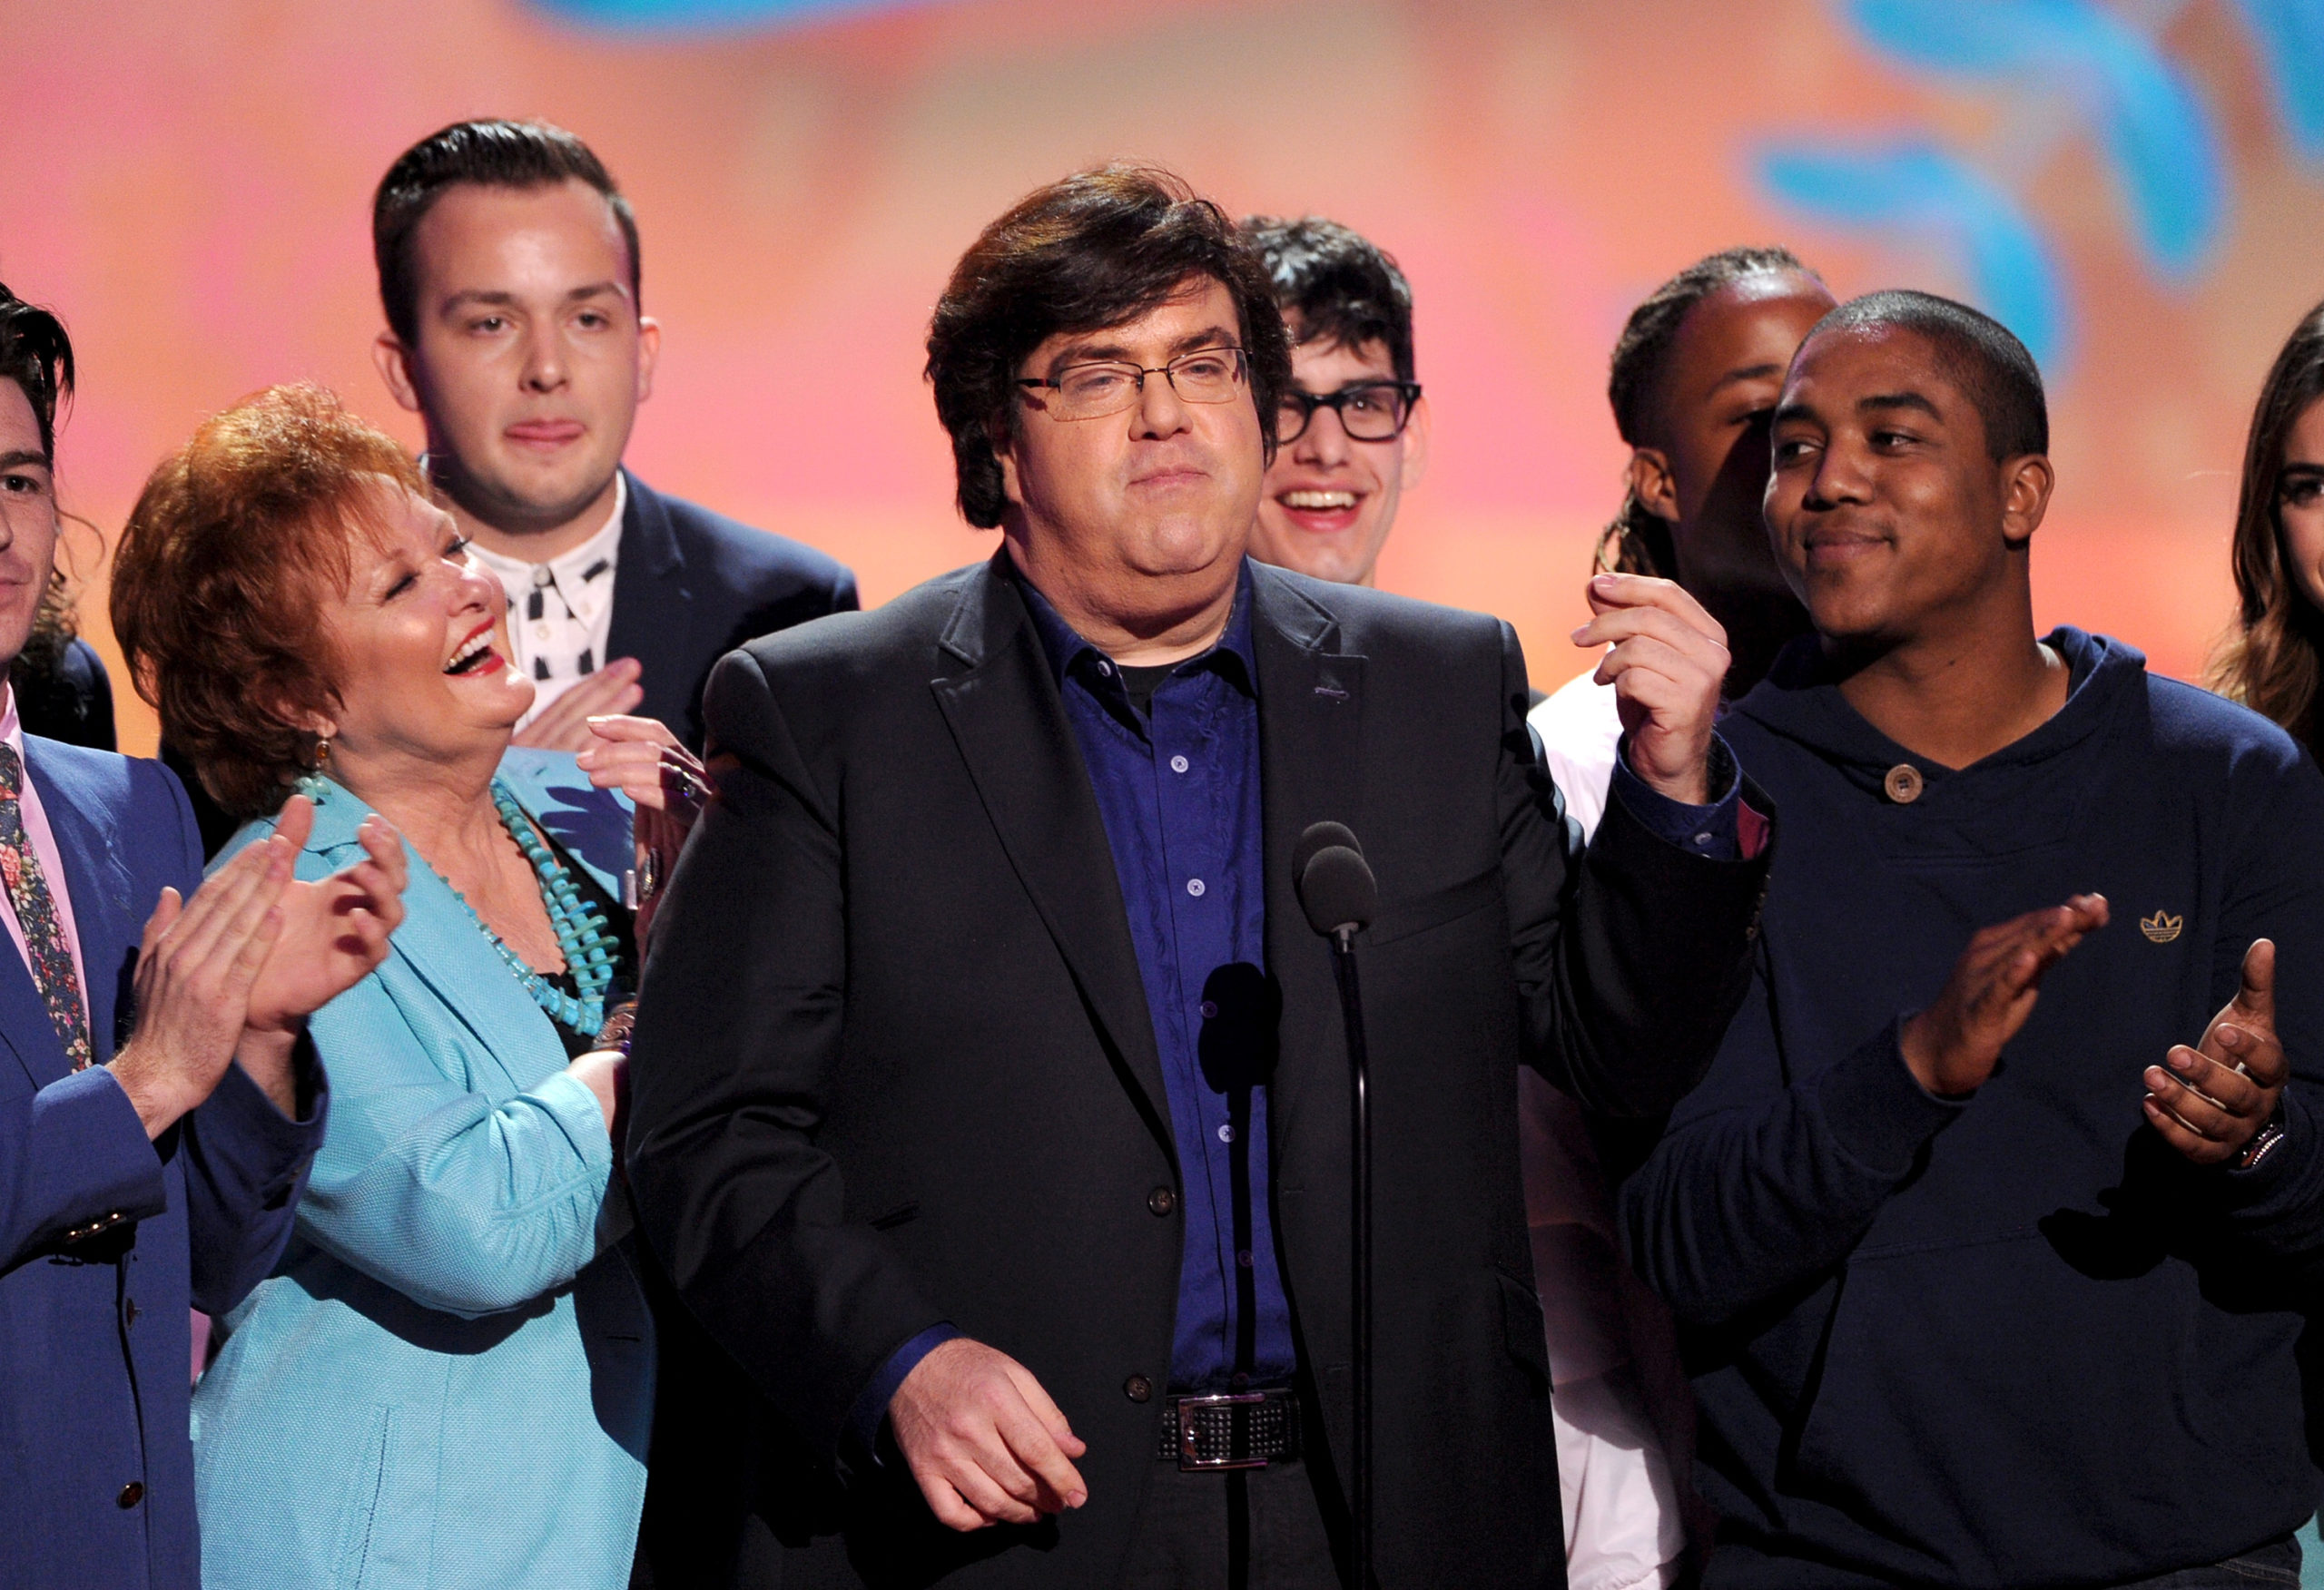 LOS ANGELES, CA - MARCH 29: Writer/producer Dan Schneider (C) accepts the Lifetime Achievement Award onstage with actors Maree Cheatham and Christopher Massey onstage during Nickelodeon's 27th Annual Kids' Choice Awards held at USC Galen Center on March 29, 2014 in Los Angeles, California. (Photo by Kevin Winter/Getty Images)